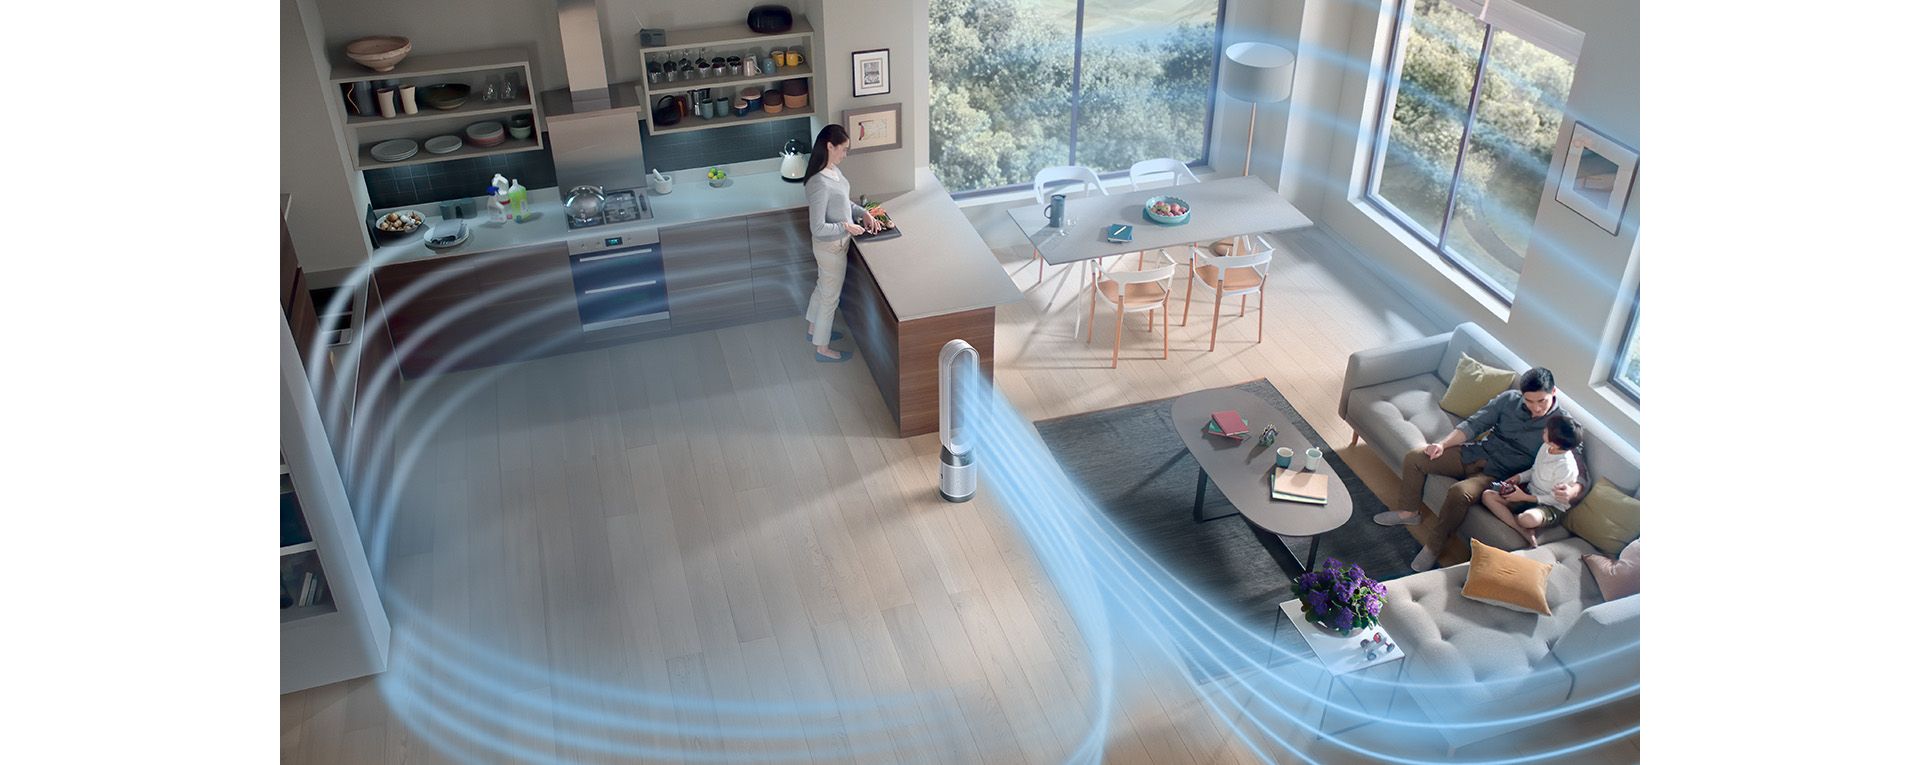 The airflow of a Dyson purifier purifying the whole room.